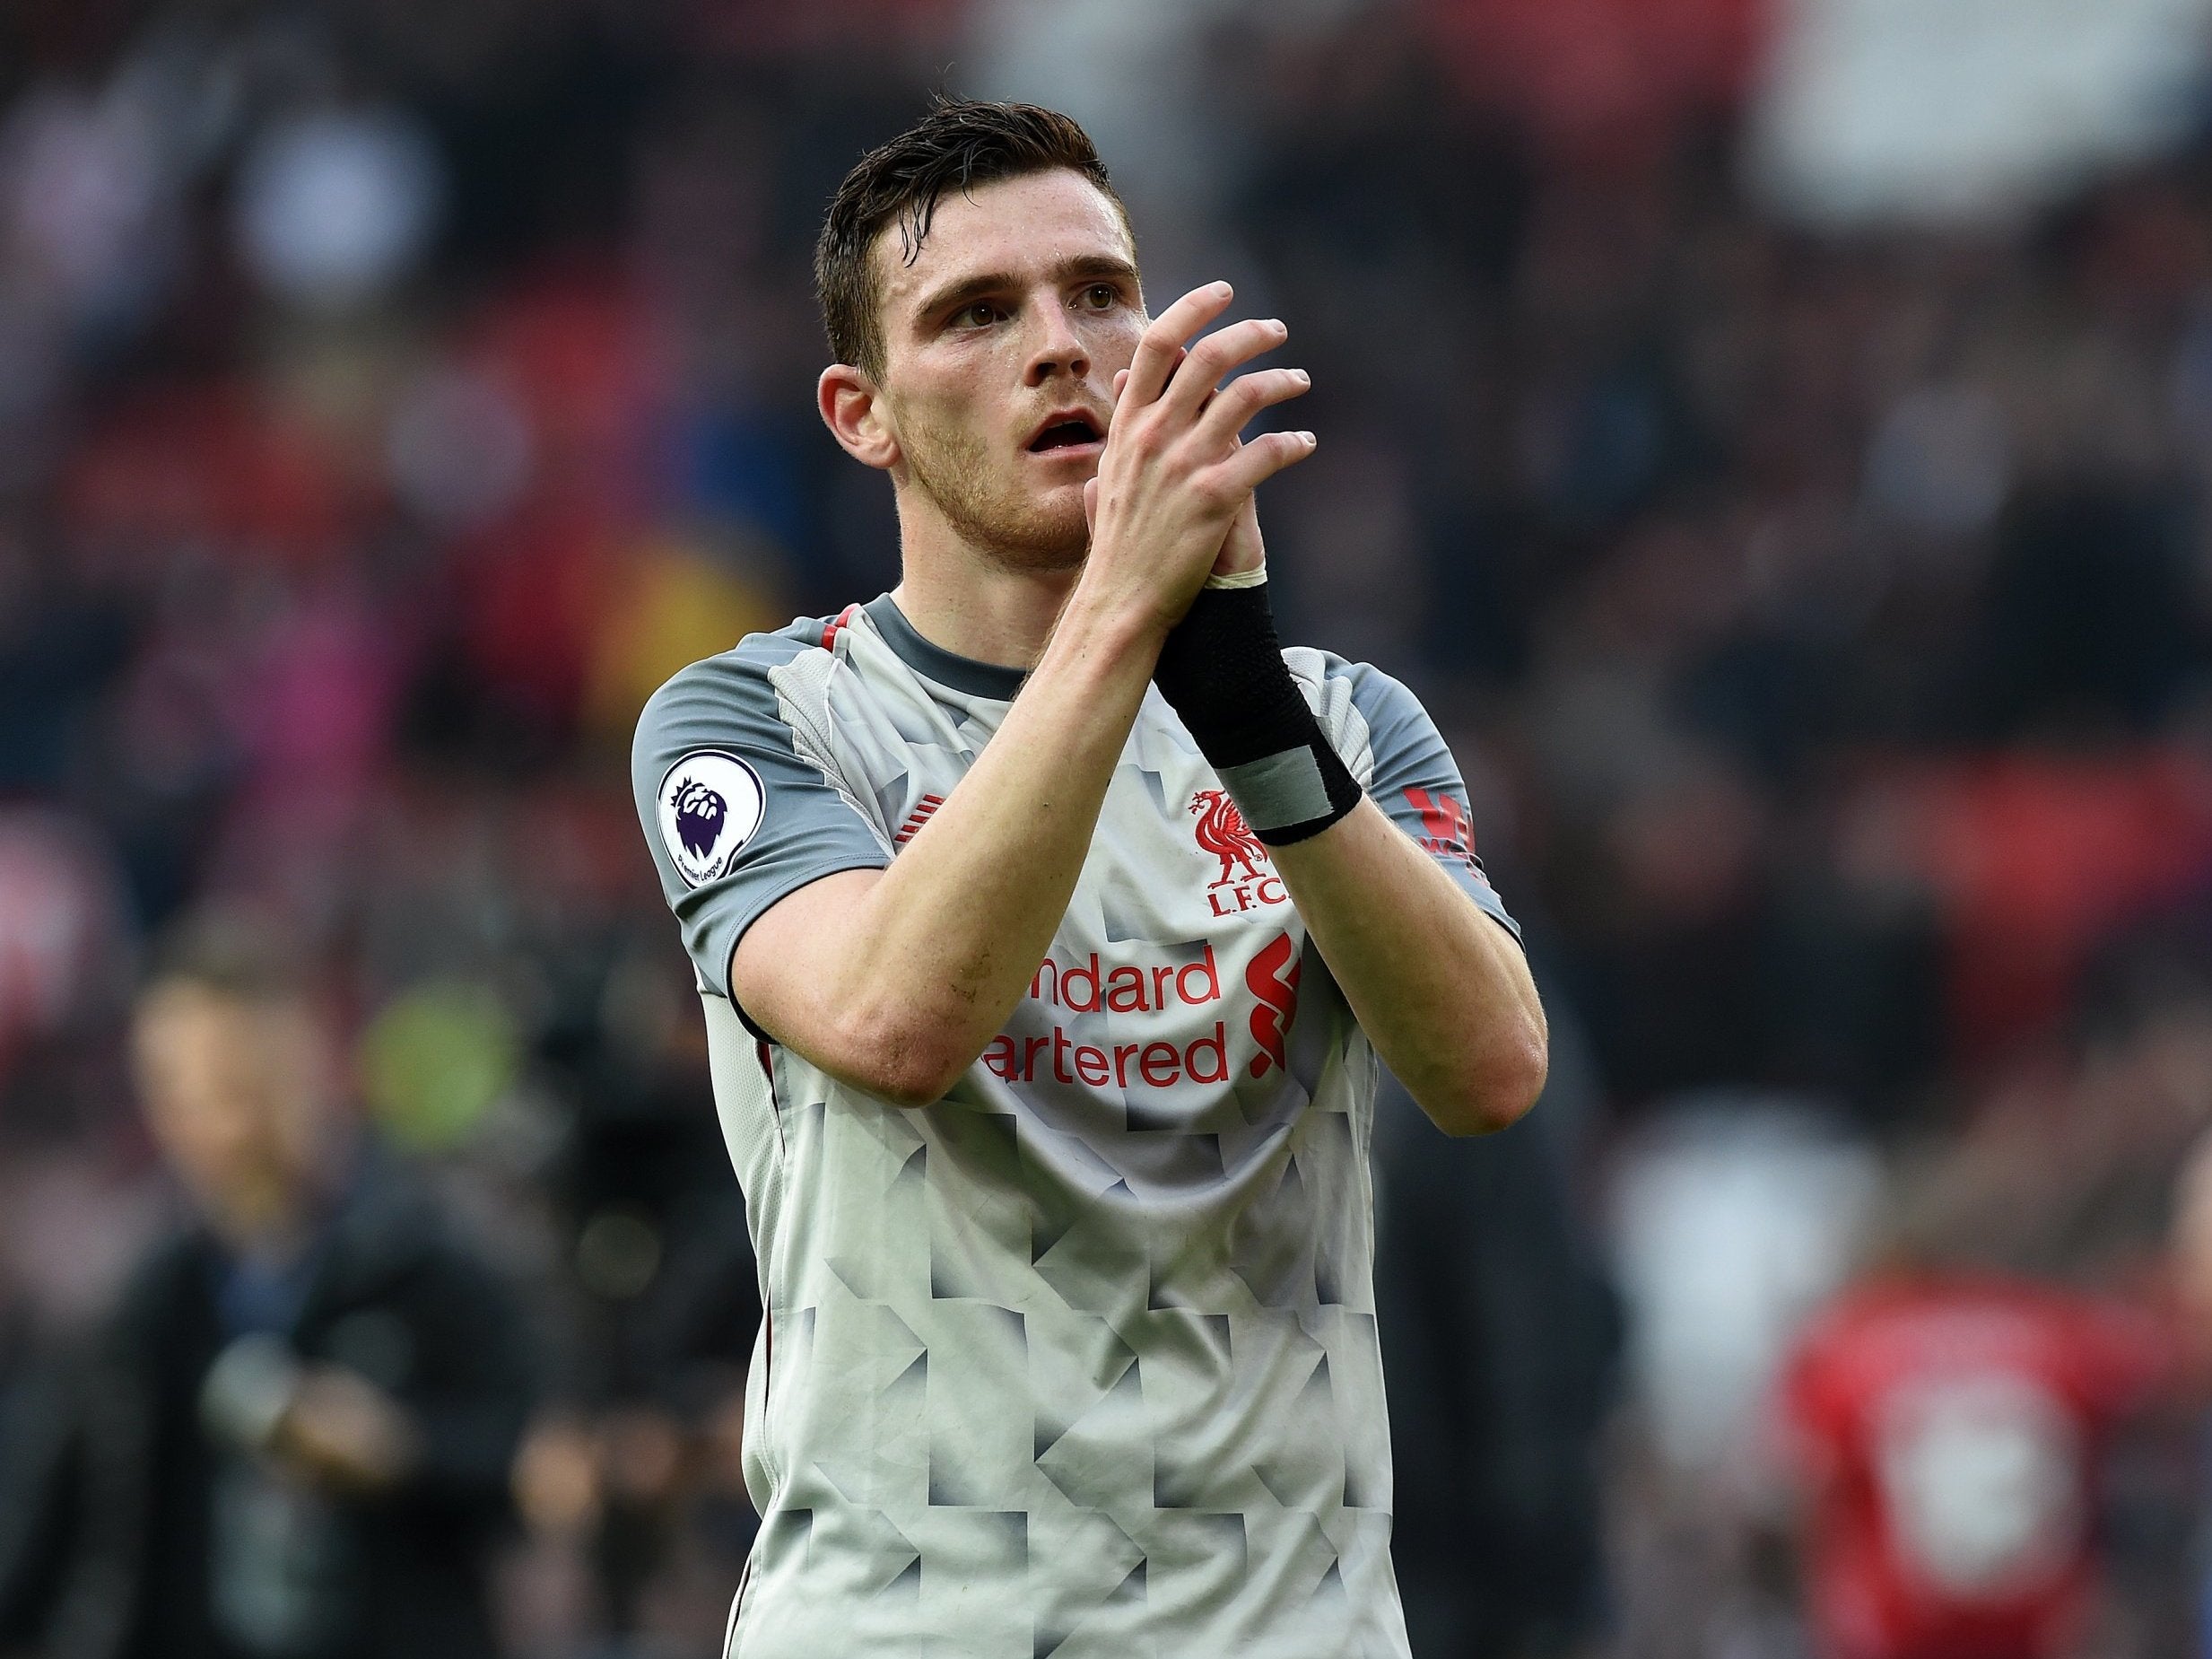 Robertson felt Liverpool could've done more